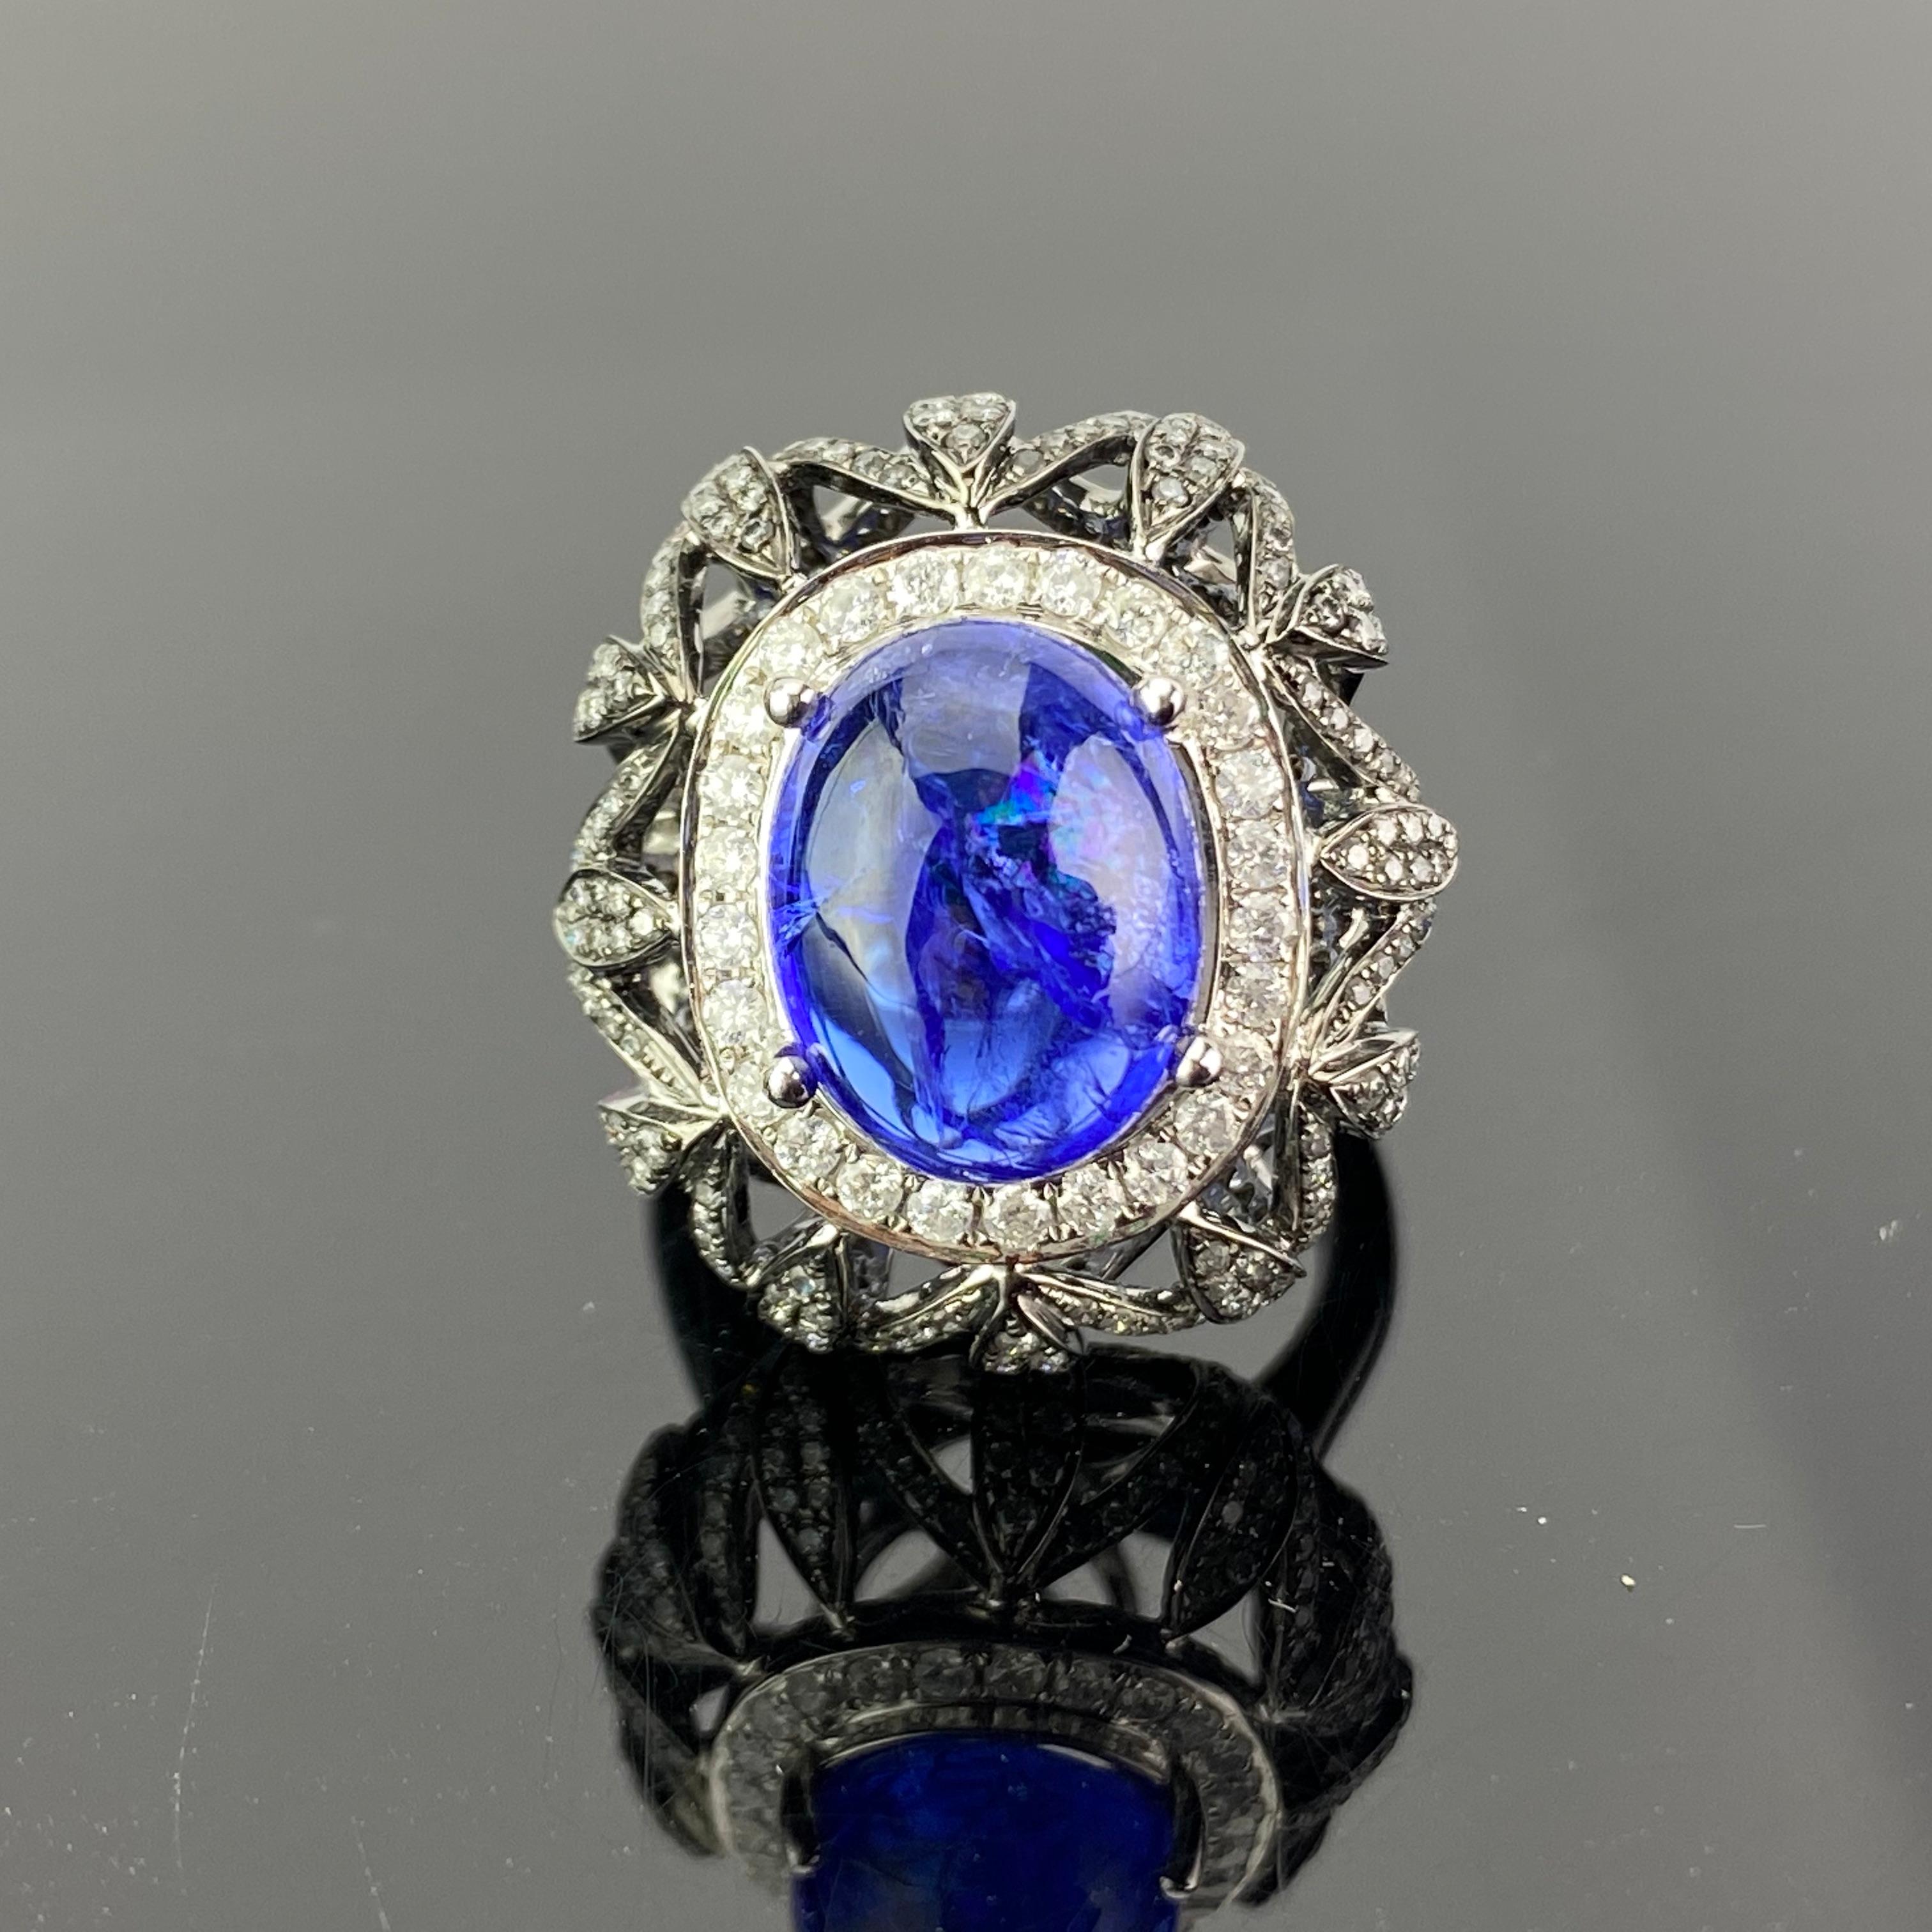 A one of a kind cocktail ring, featuring a transparent, full of luster 8.16 carat natural Tanzanite. 1.80 carats of White Diamonds are used, and a mix of 13.81 grams of white gold and black rhodium plated gold makes this ring very unique. Currently